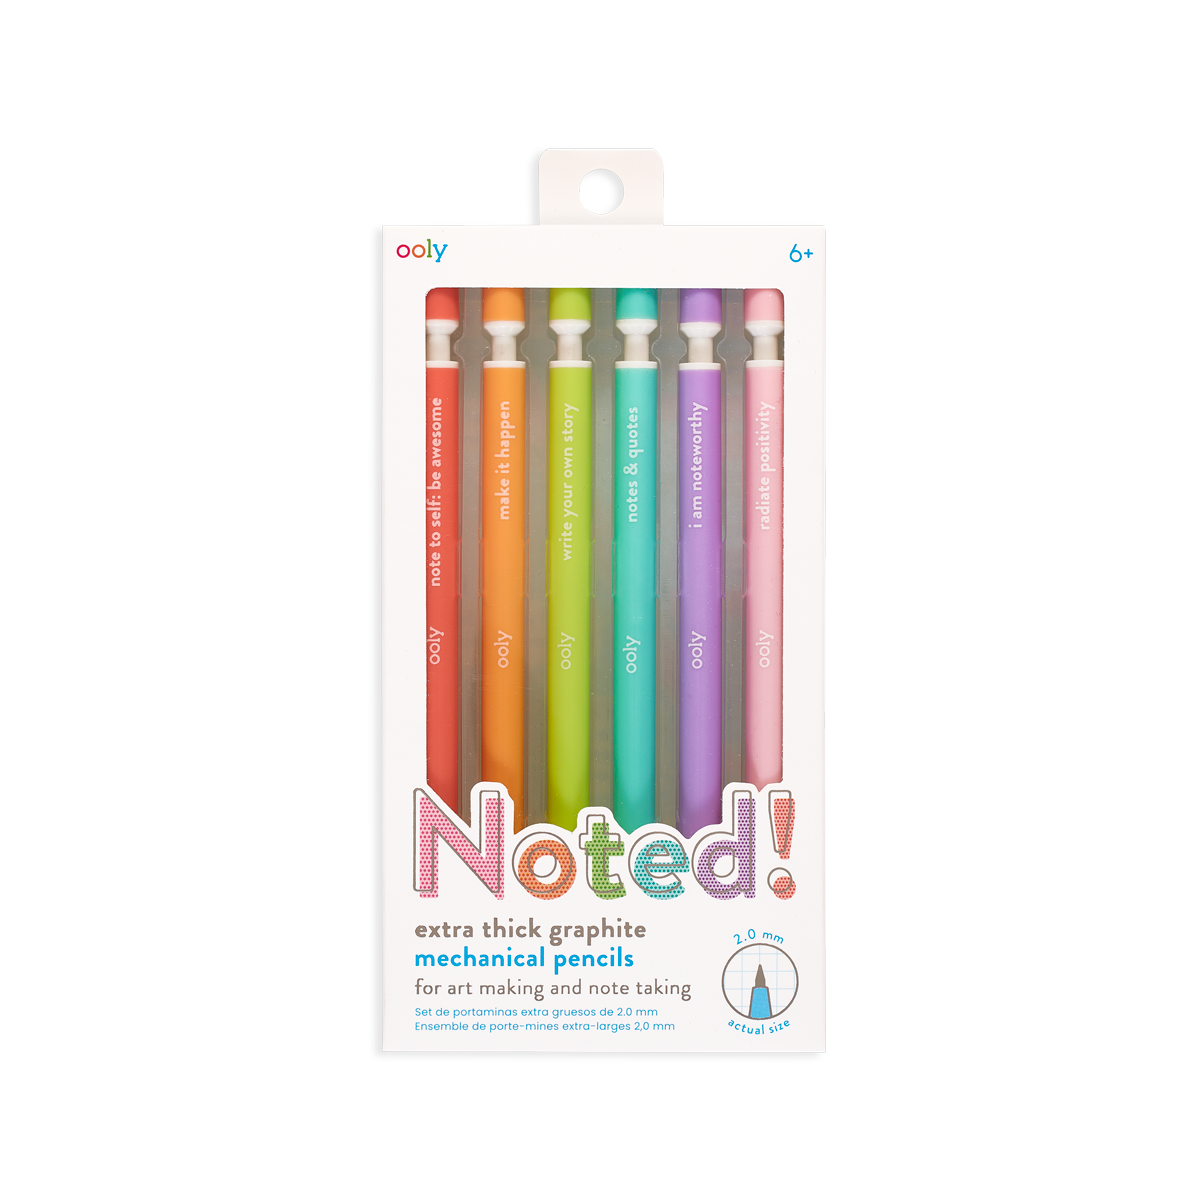 OOLY Noted mechanical pencils set of 6 in packaging